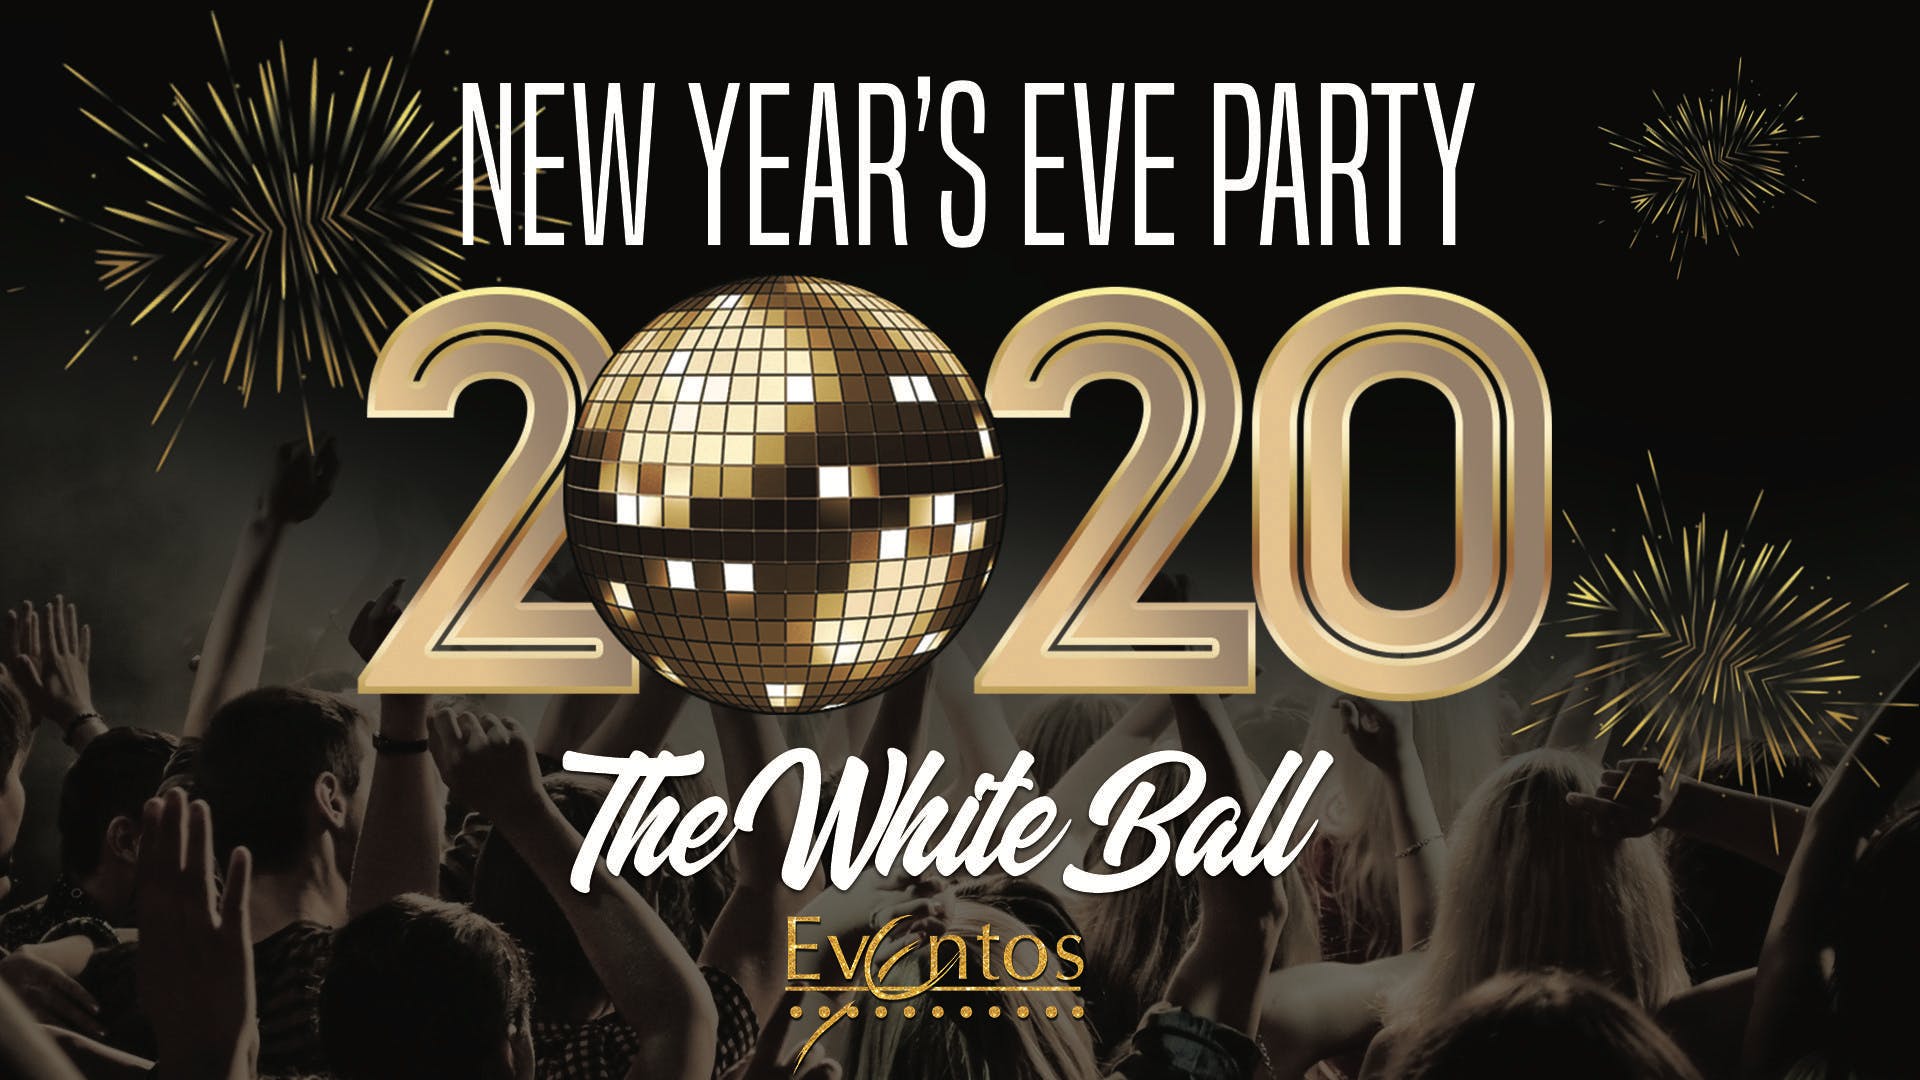 New Year’s Eve Party The White Ball